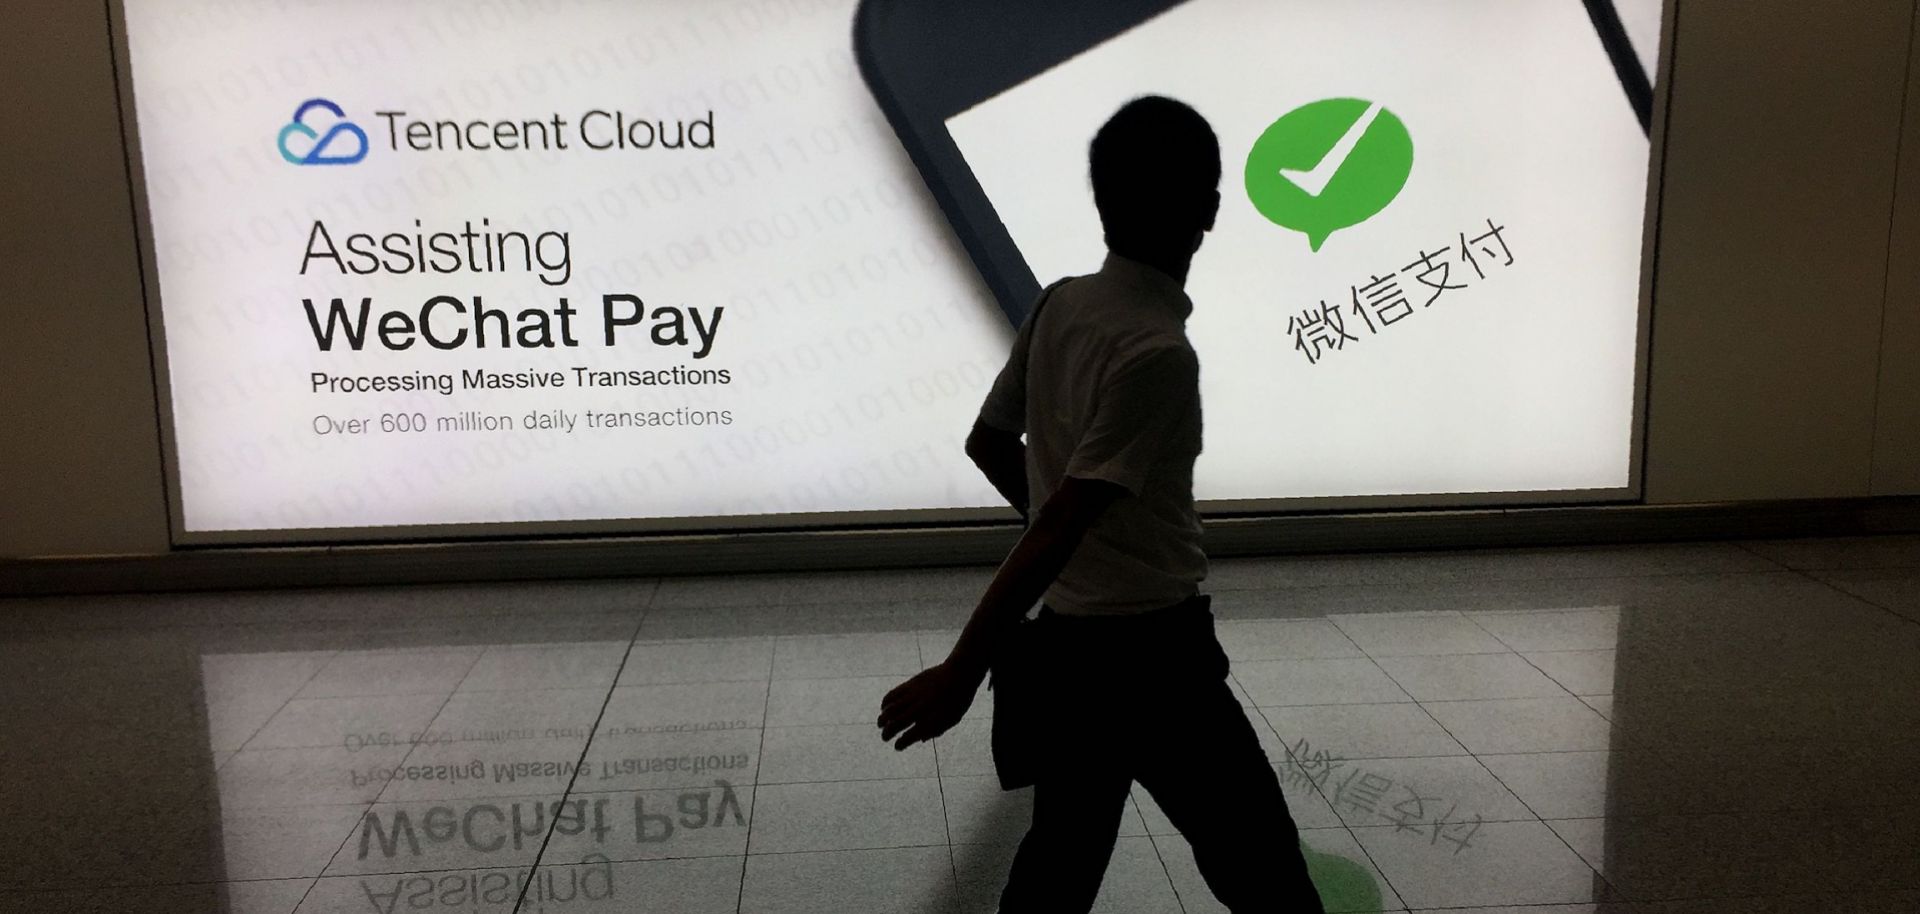 In this August 2017 photo, a man walks past an ad in Hong Kong's international airport for the social media platform WeChat, which is owned by China's Tencent.